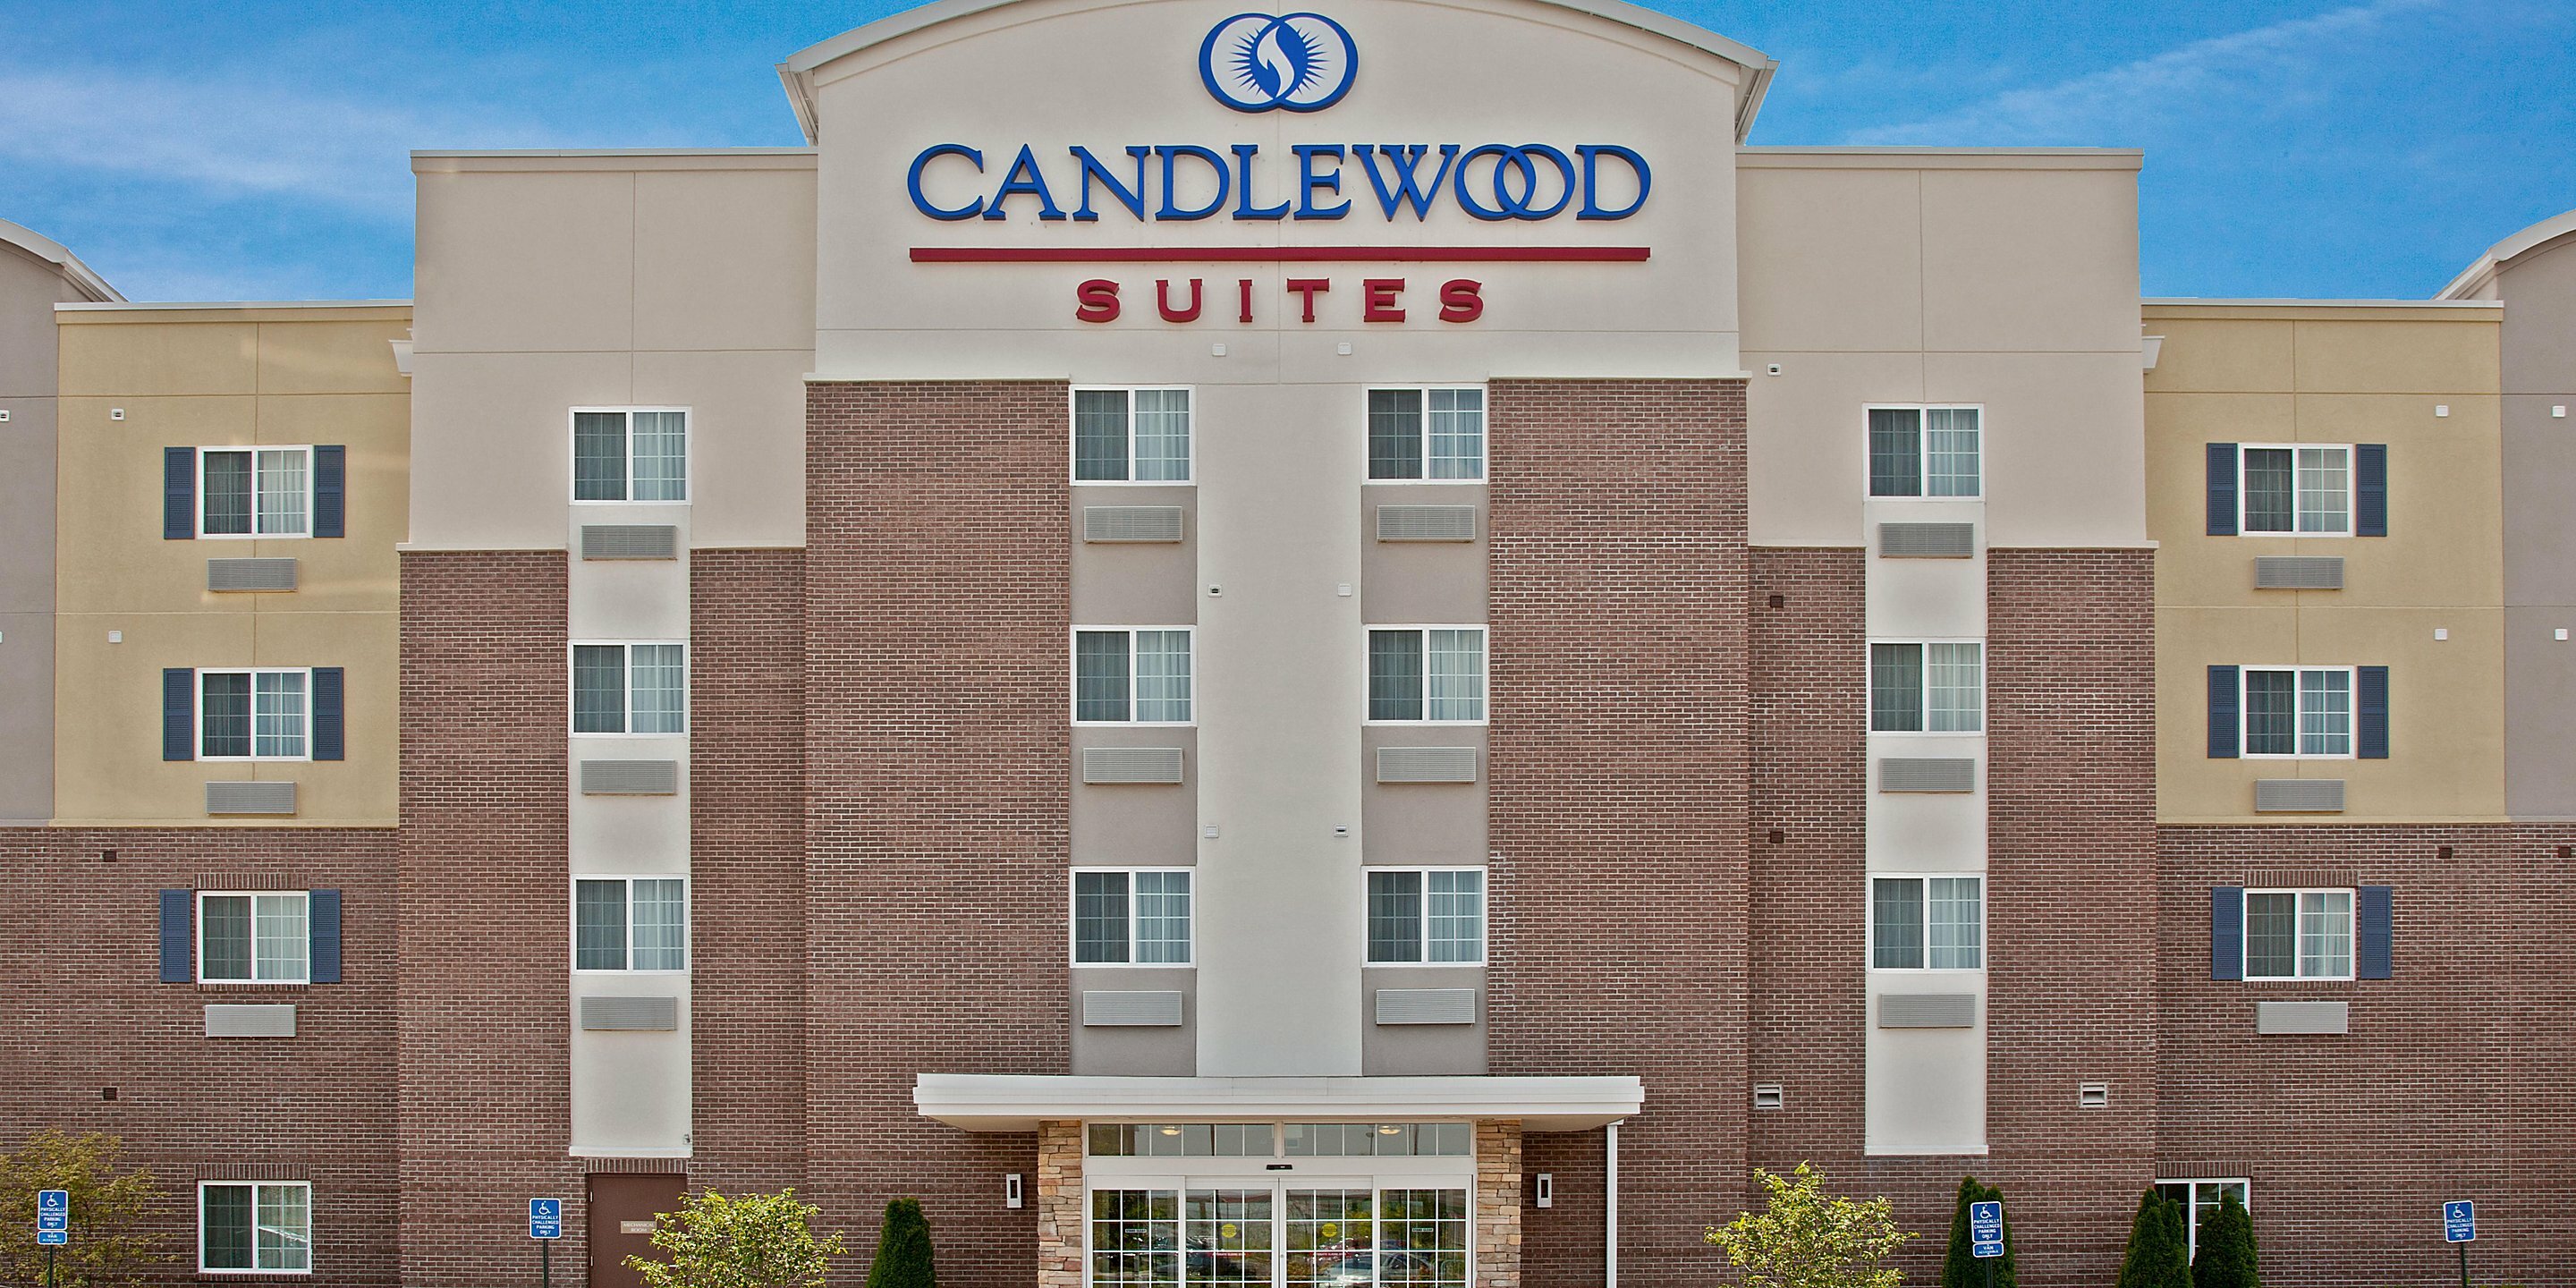 Photo of Candlewood Suites Louisville North, Clarksville, IN